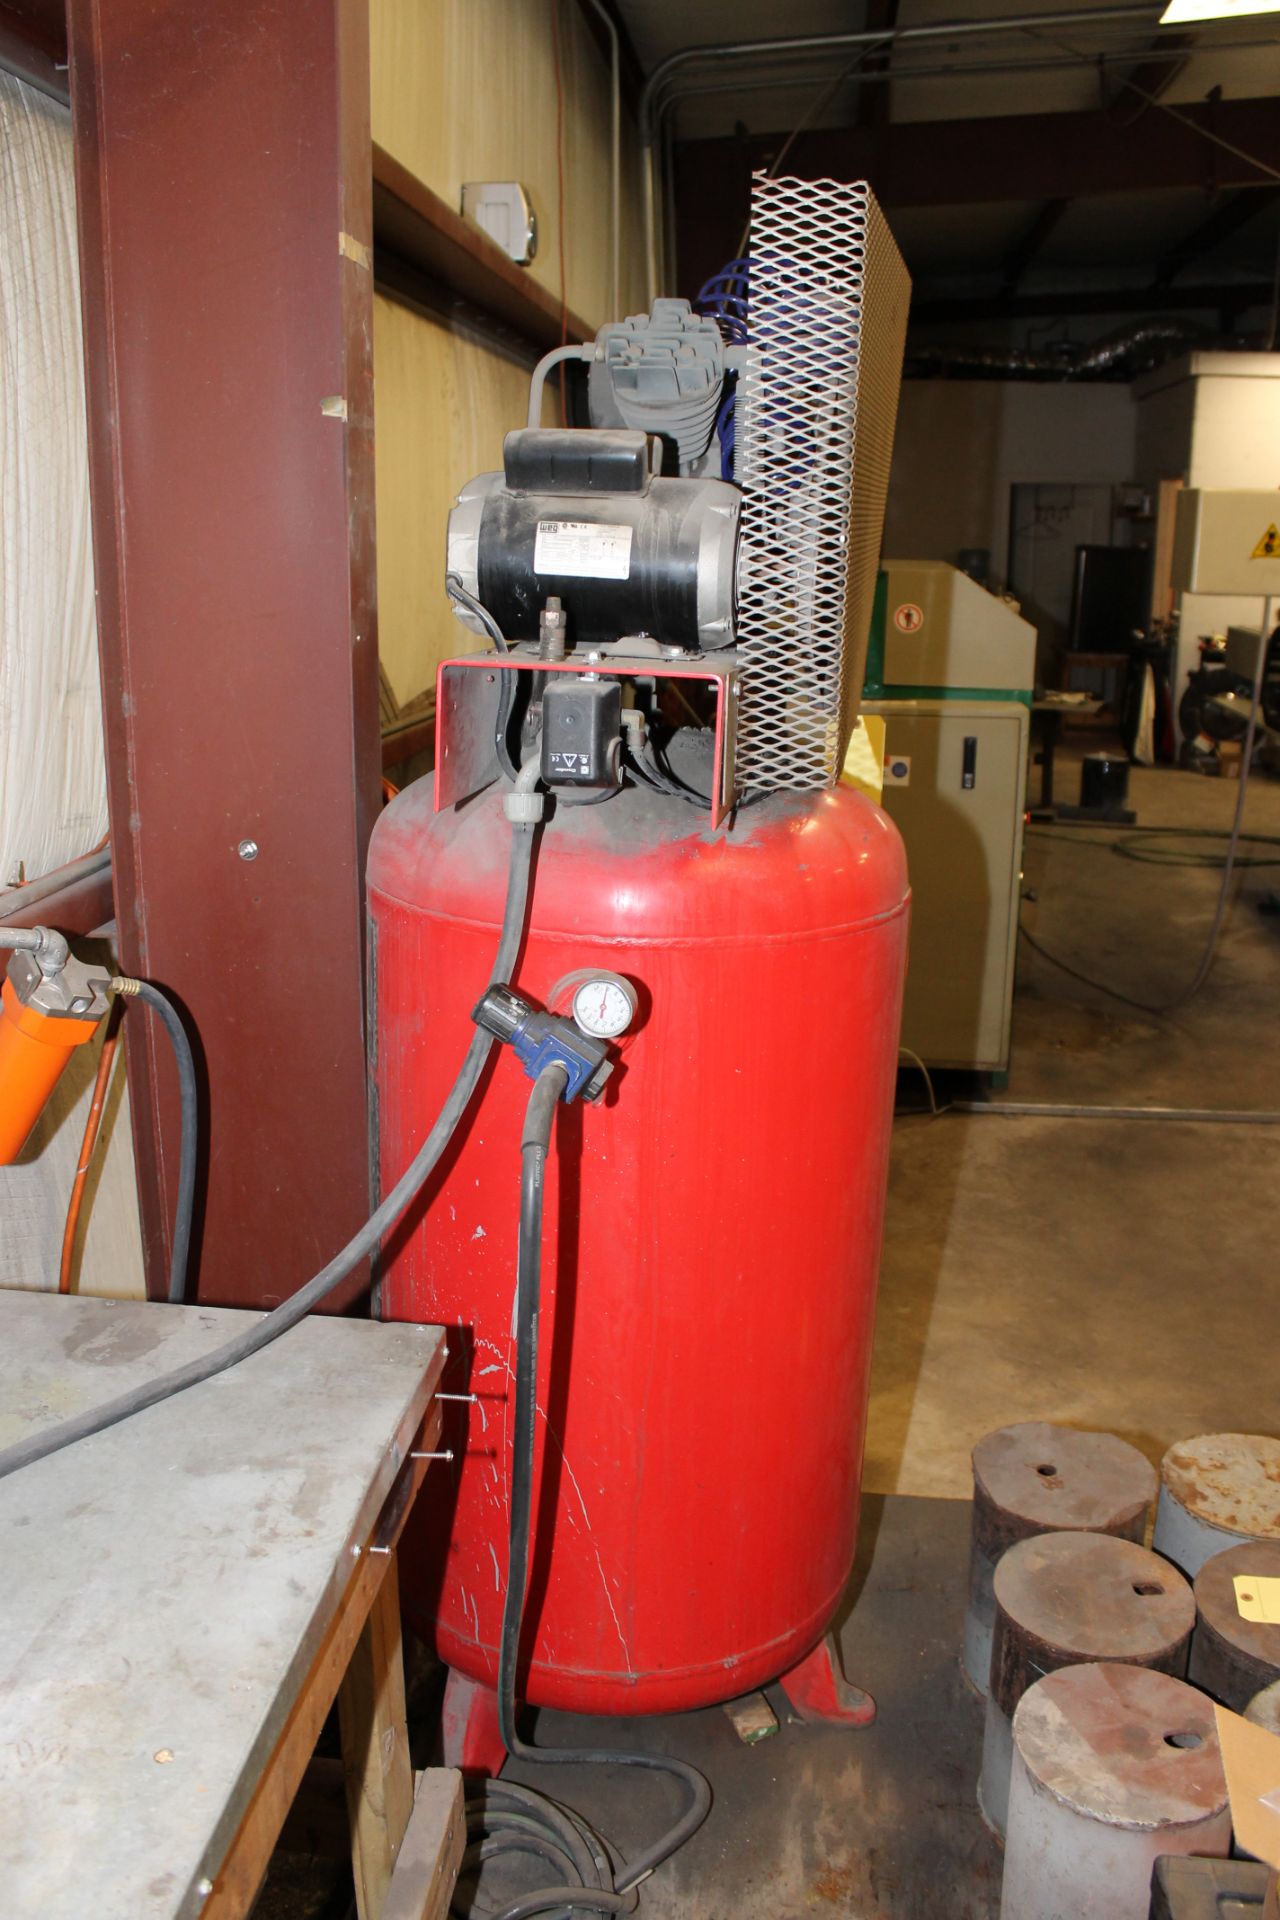 RECIPROCATING TYPE AIR COMPRESSOR, HUSKY, 2-stage, 7 HP motor, 80 gal. vert. air receiver  (Location - Image 2 of 2